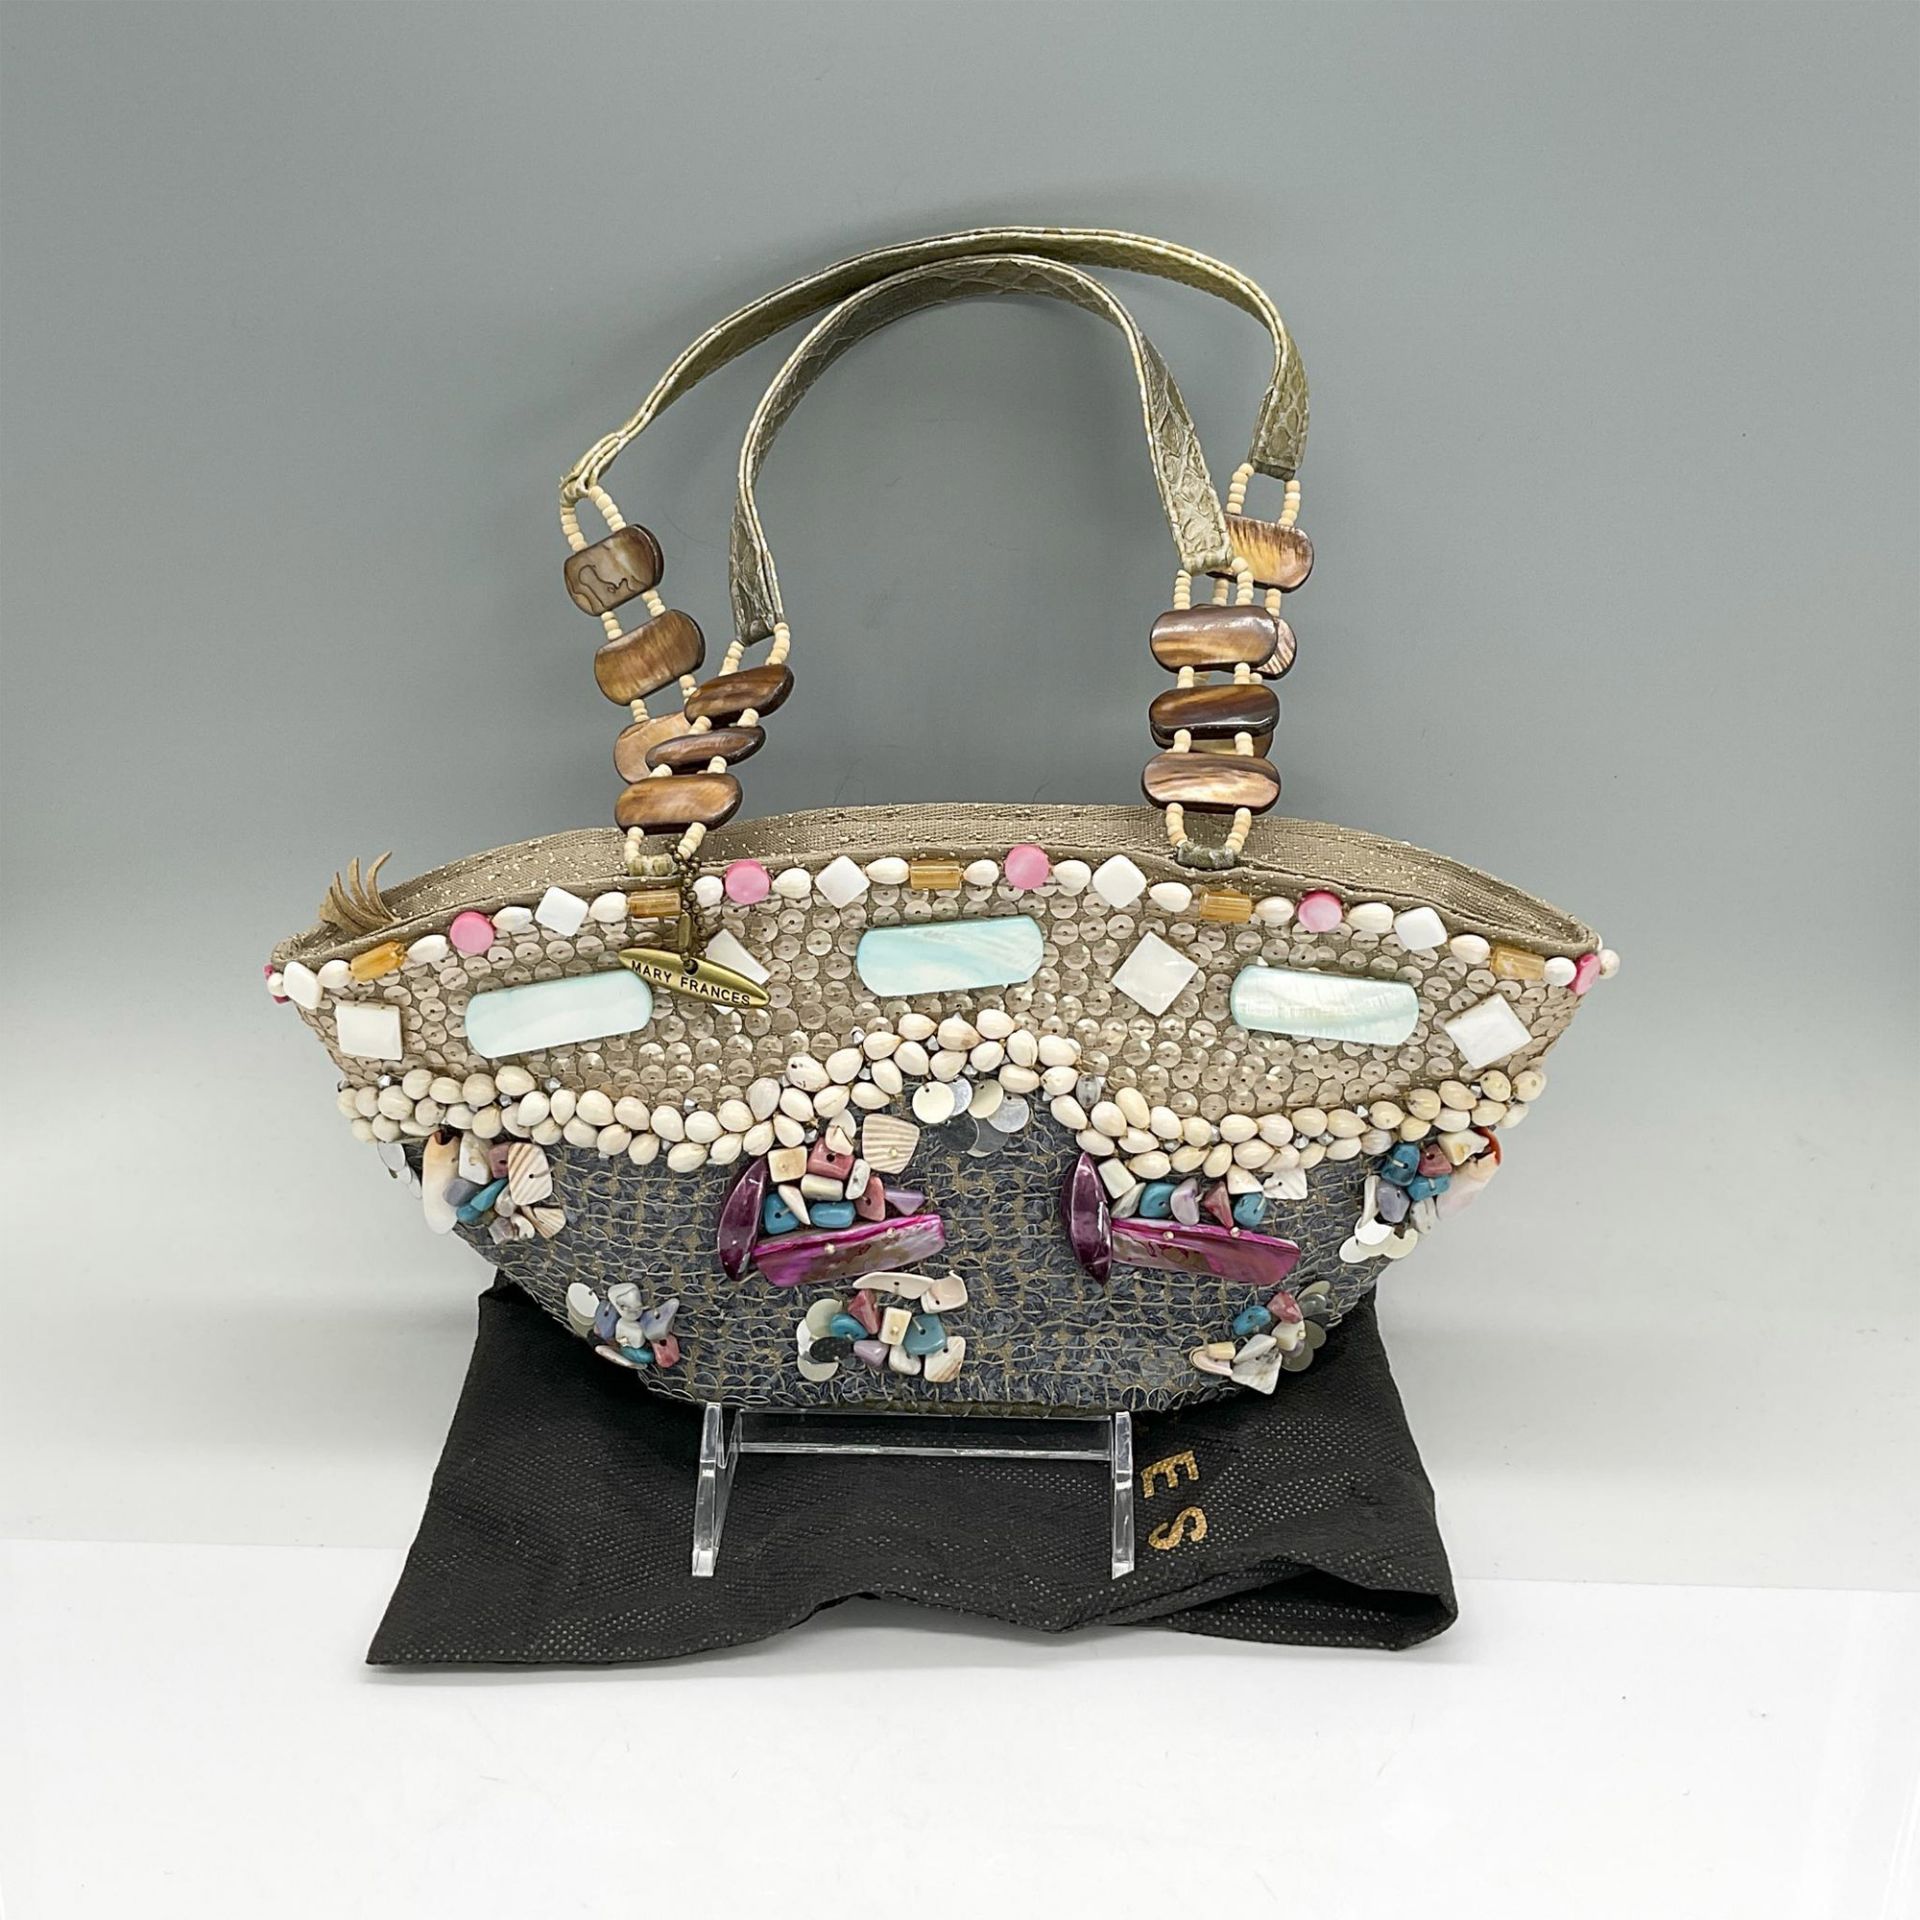 Mary Frances Fabric Handbag, Taupe With Multicolor Beads - Image 4 of 5